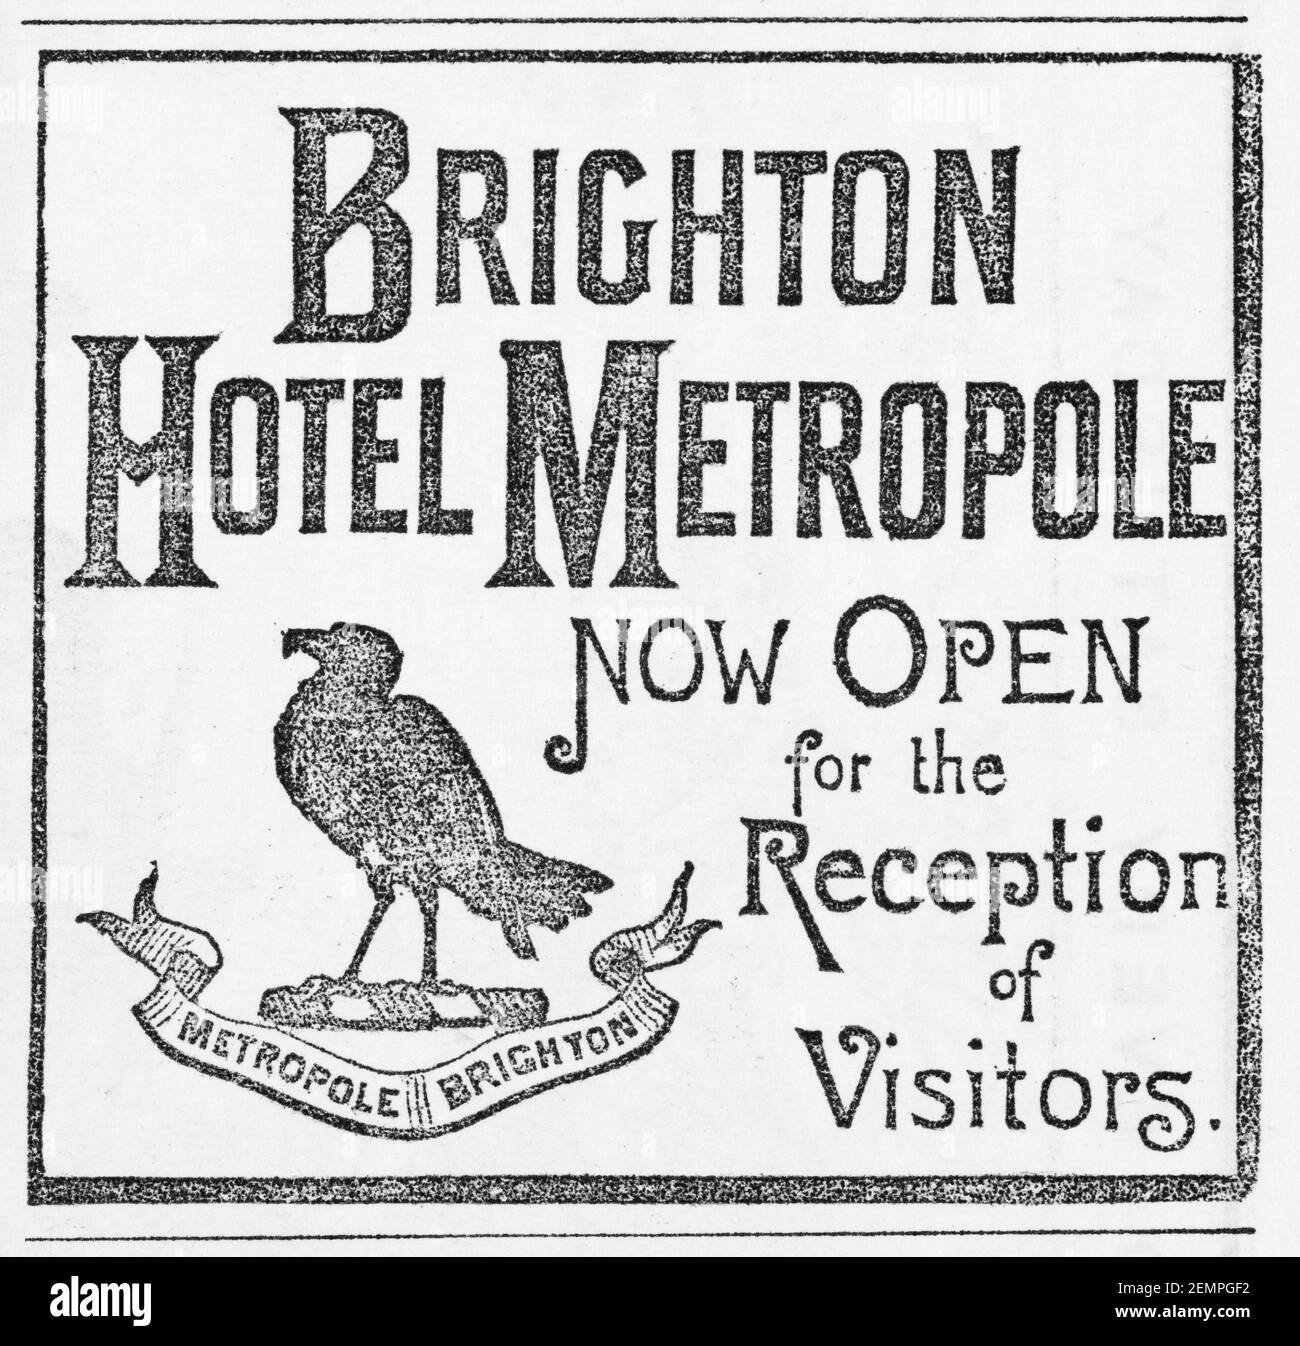 Victorian advert for Brighton's Hotel Metropole from 1891 (opened 1990) & now a Hilton hotel. History of advertising, and hospitality business. Stock Photo